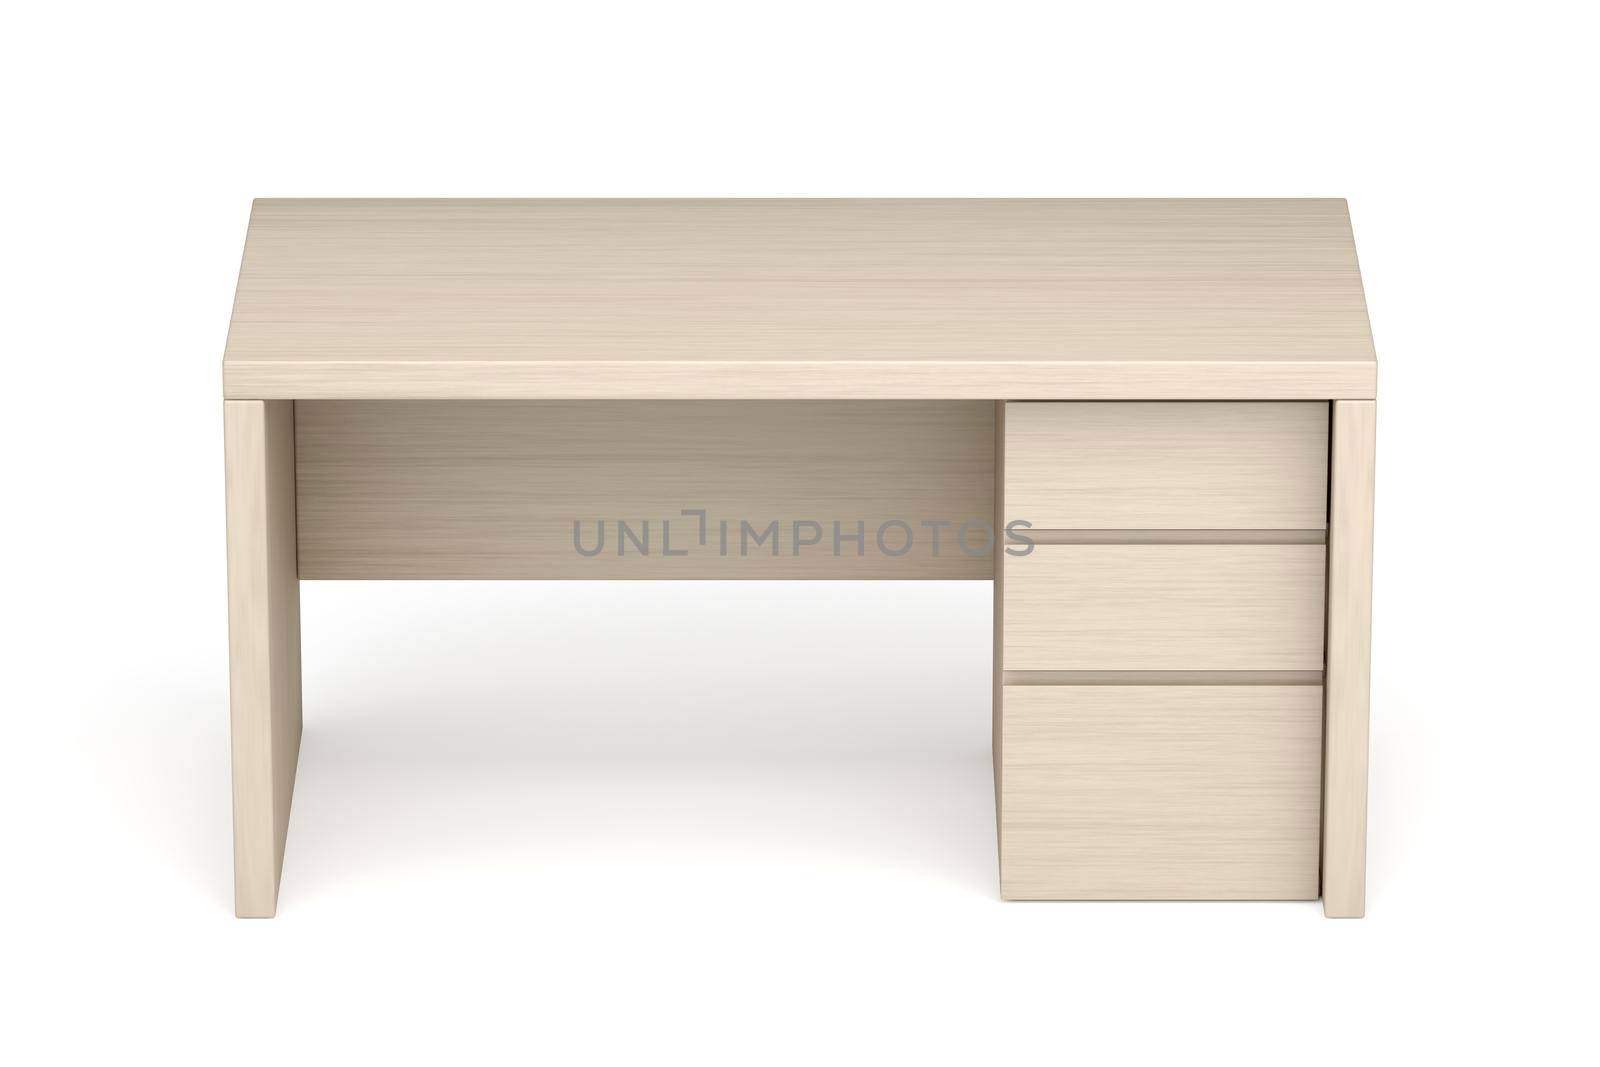 Front view of wooden desk by magraphics